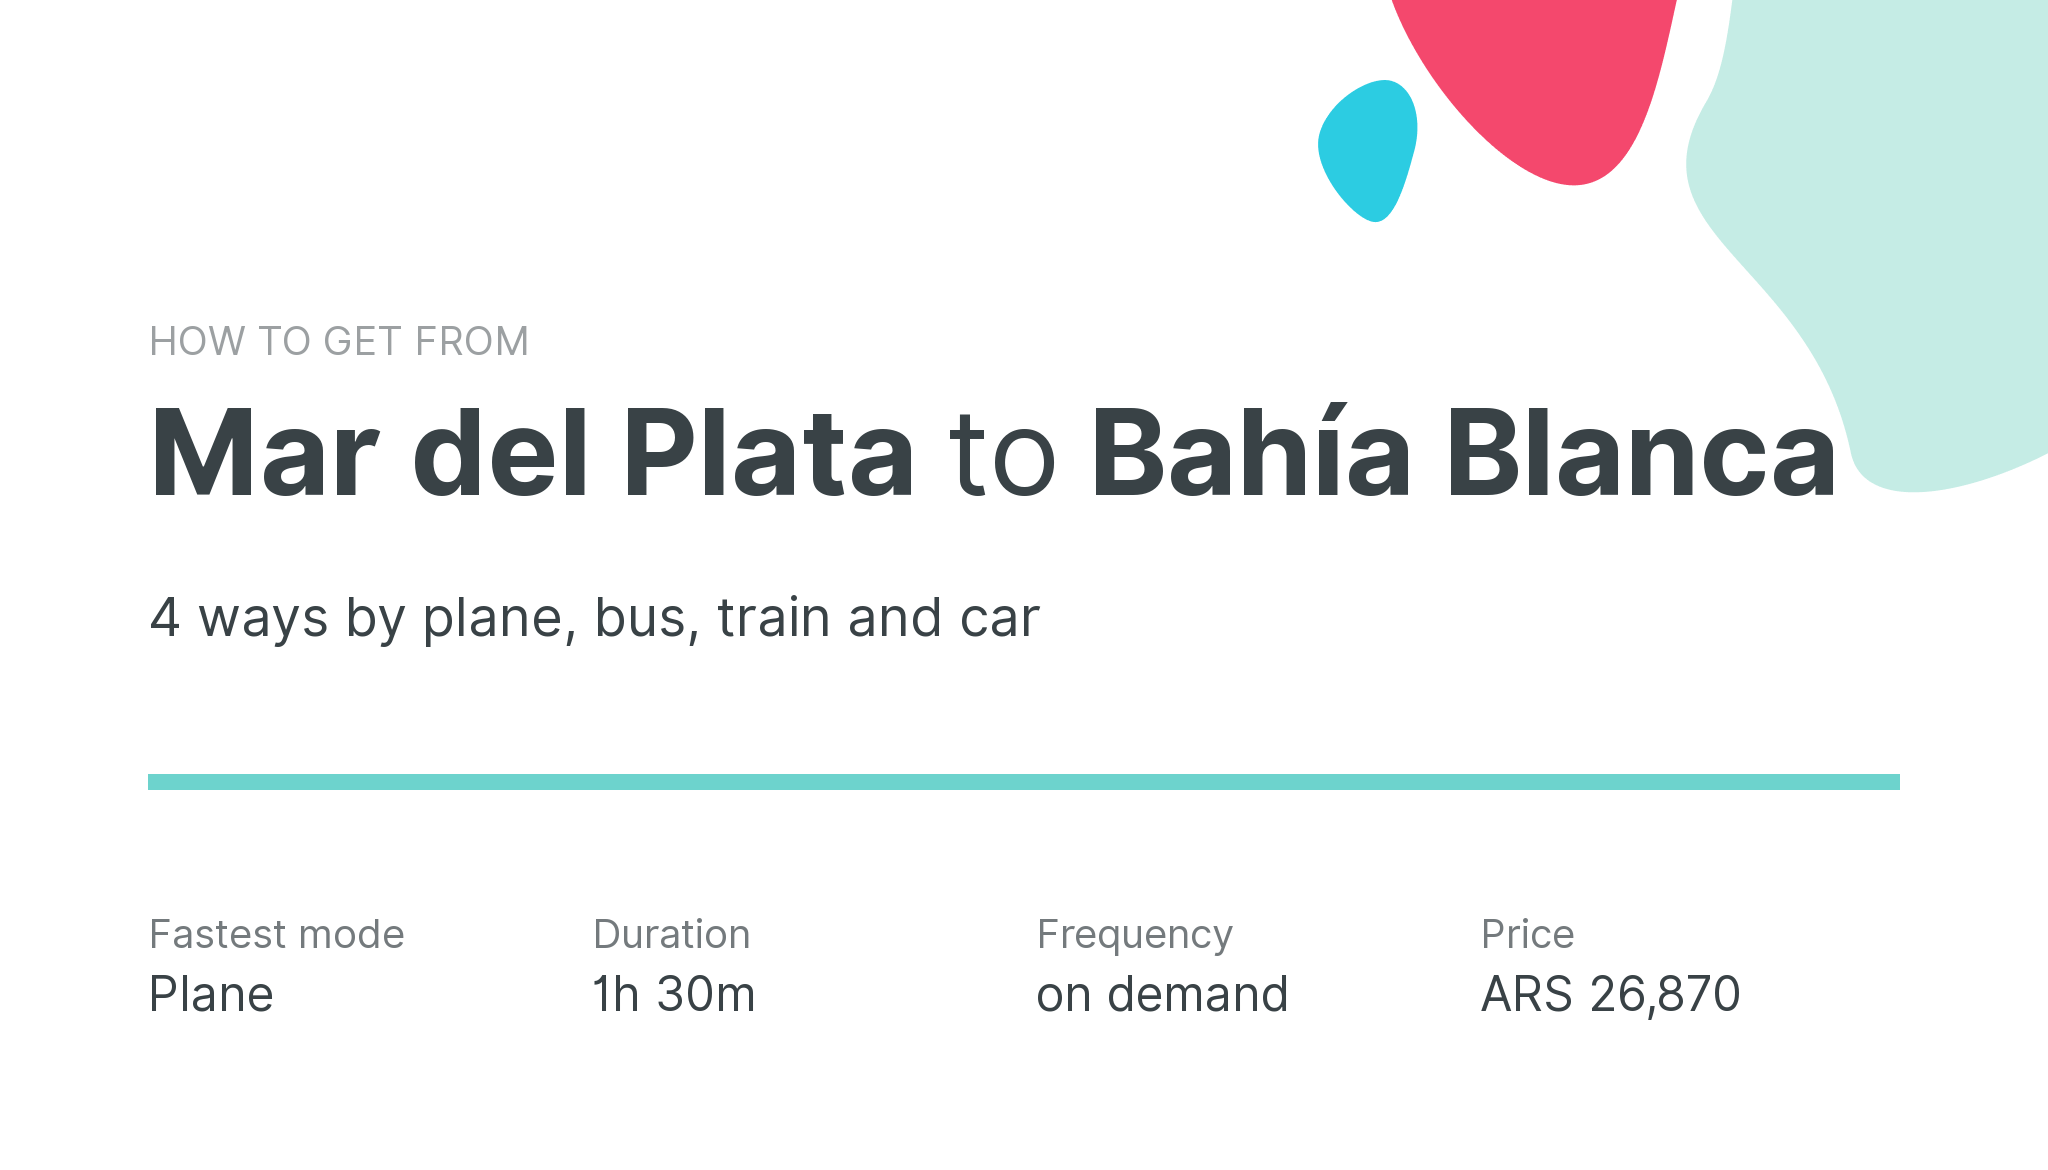 How do I get from Mar del Plata to Bahía Blanca